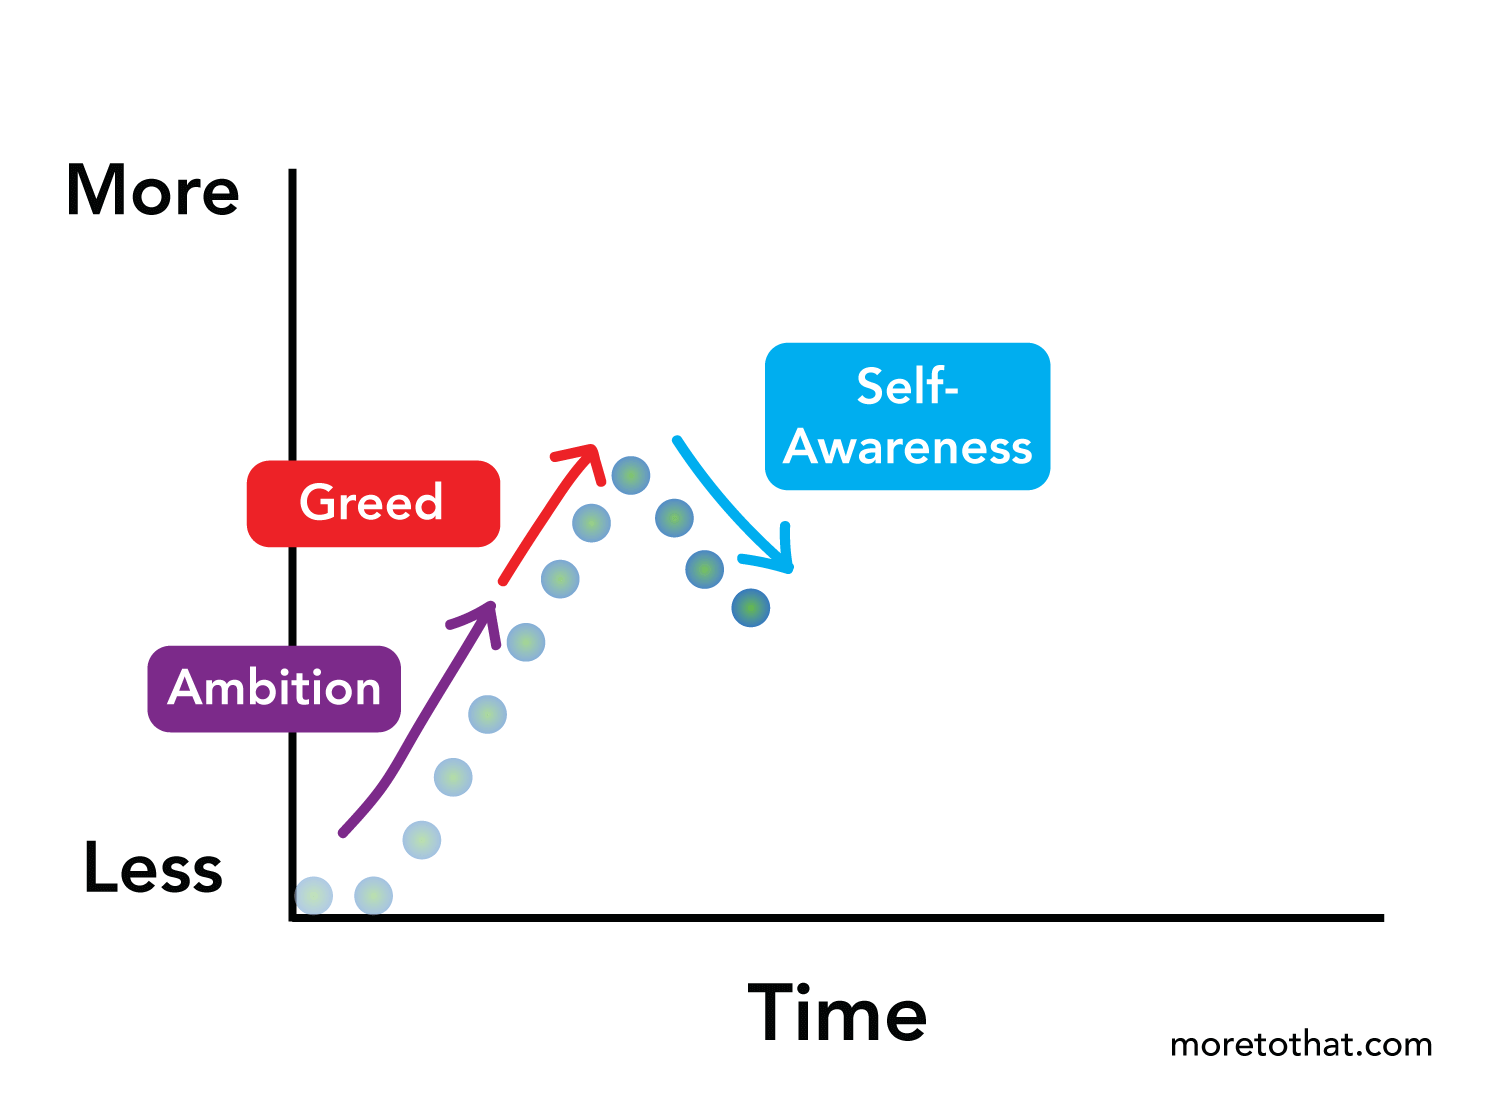 ambition greed and self-awareness on the Many Worlds of Enough